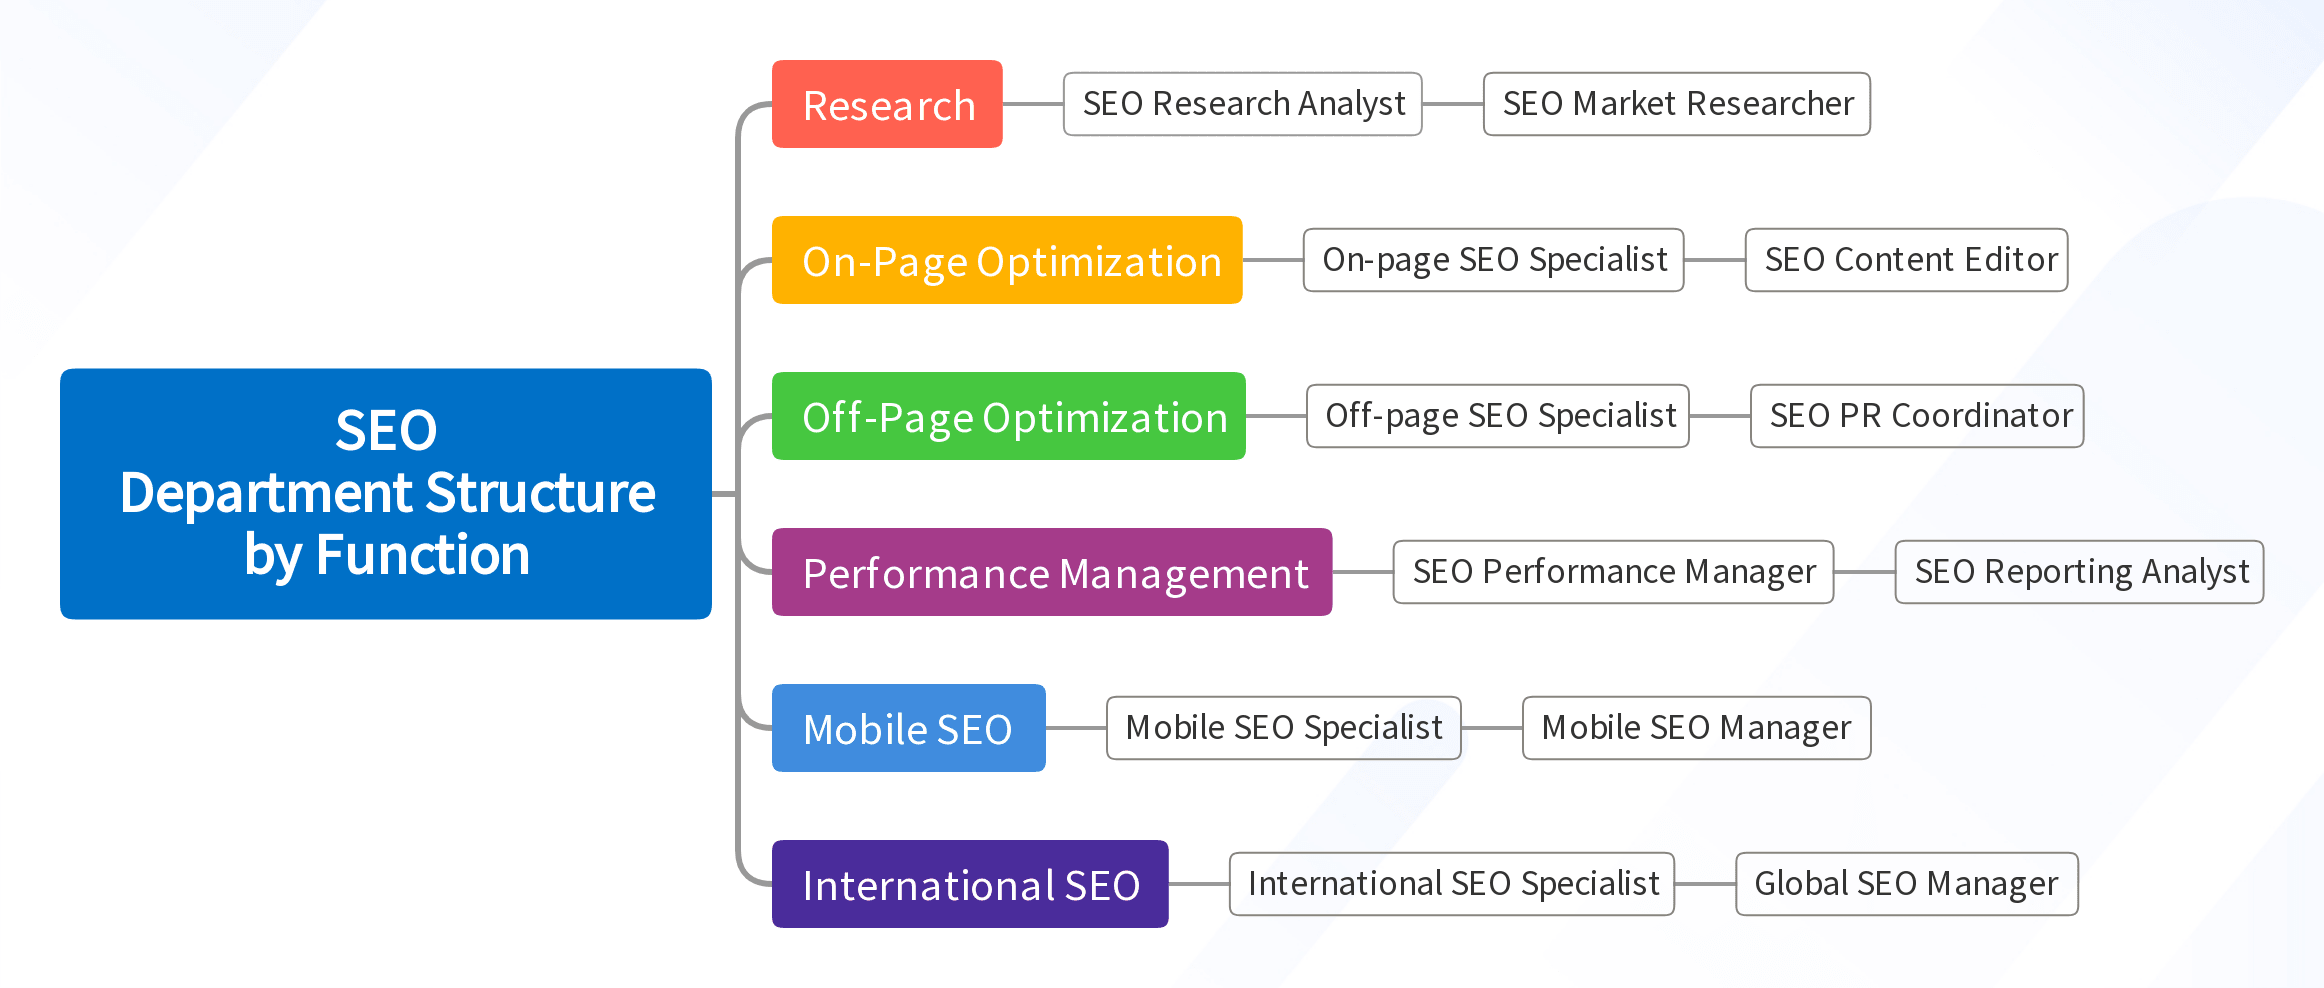 SEO Department Structure by Function